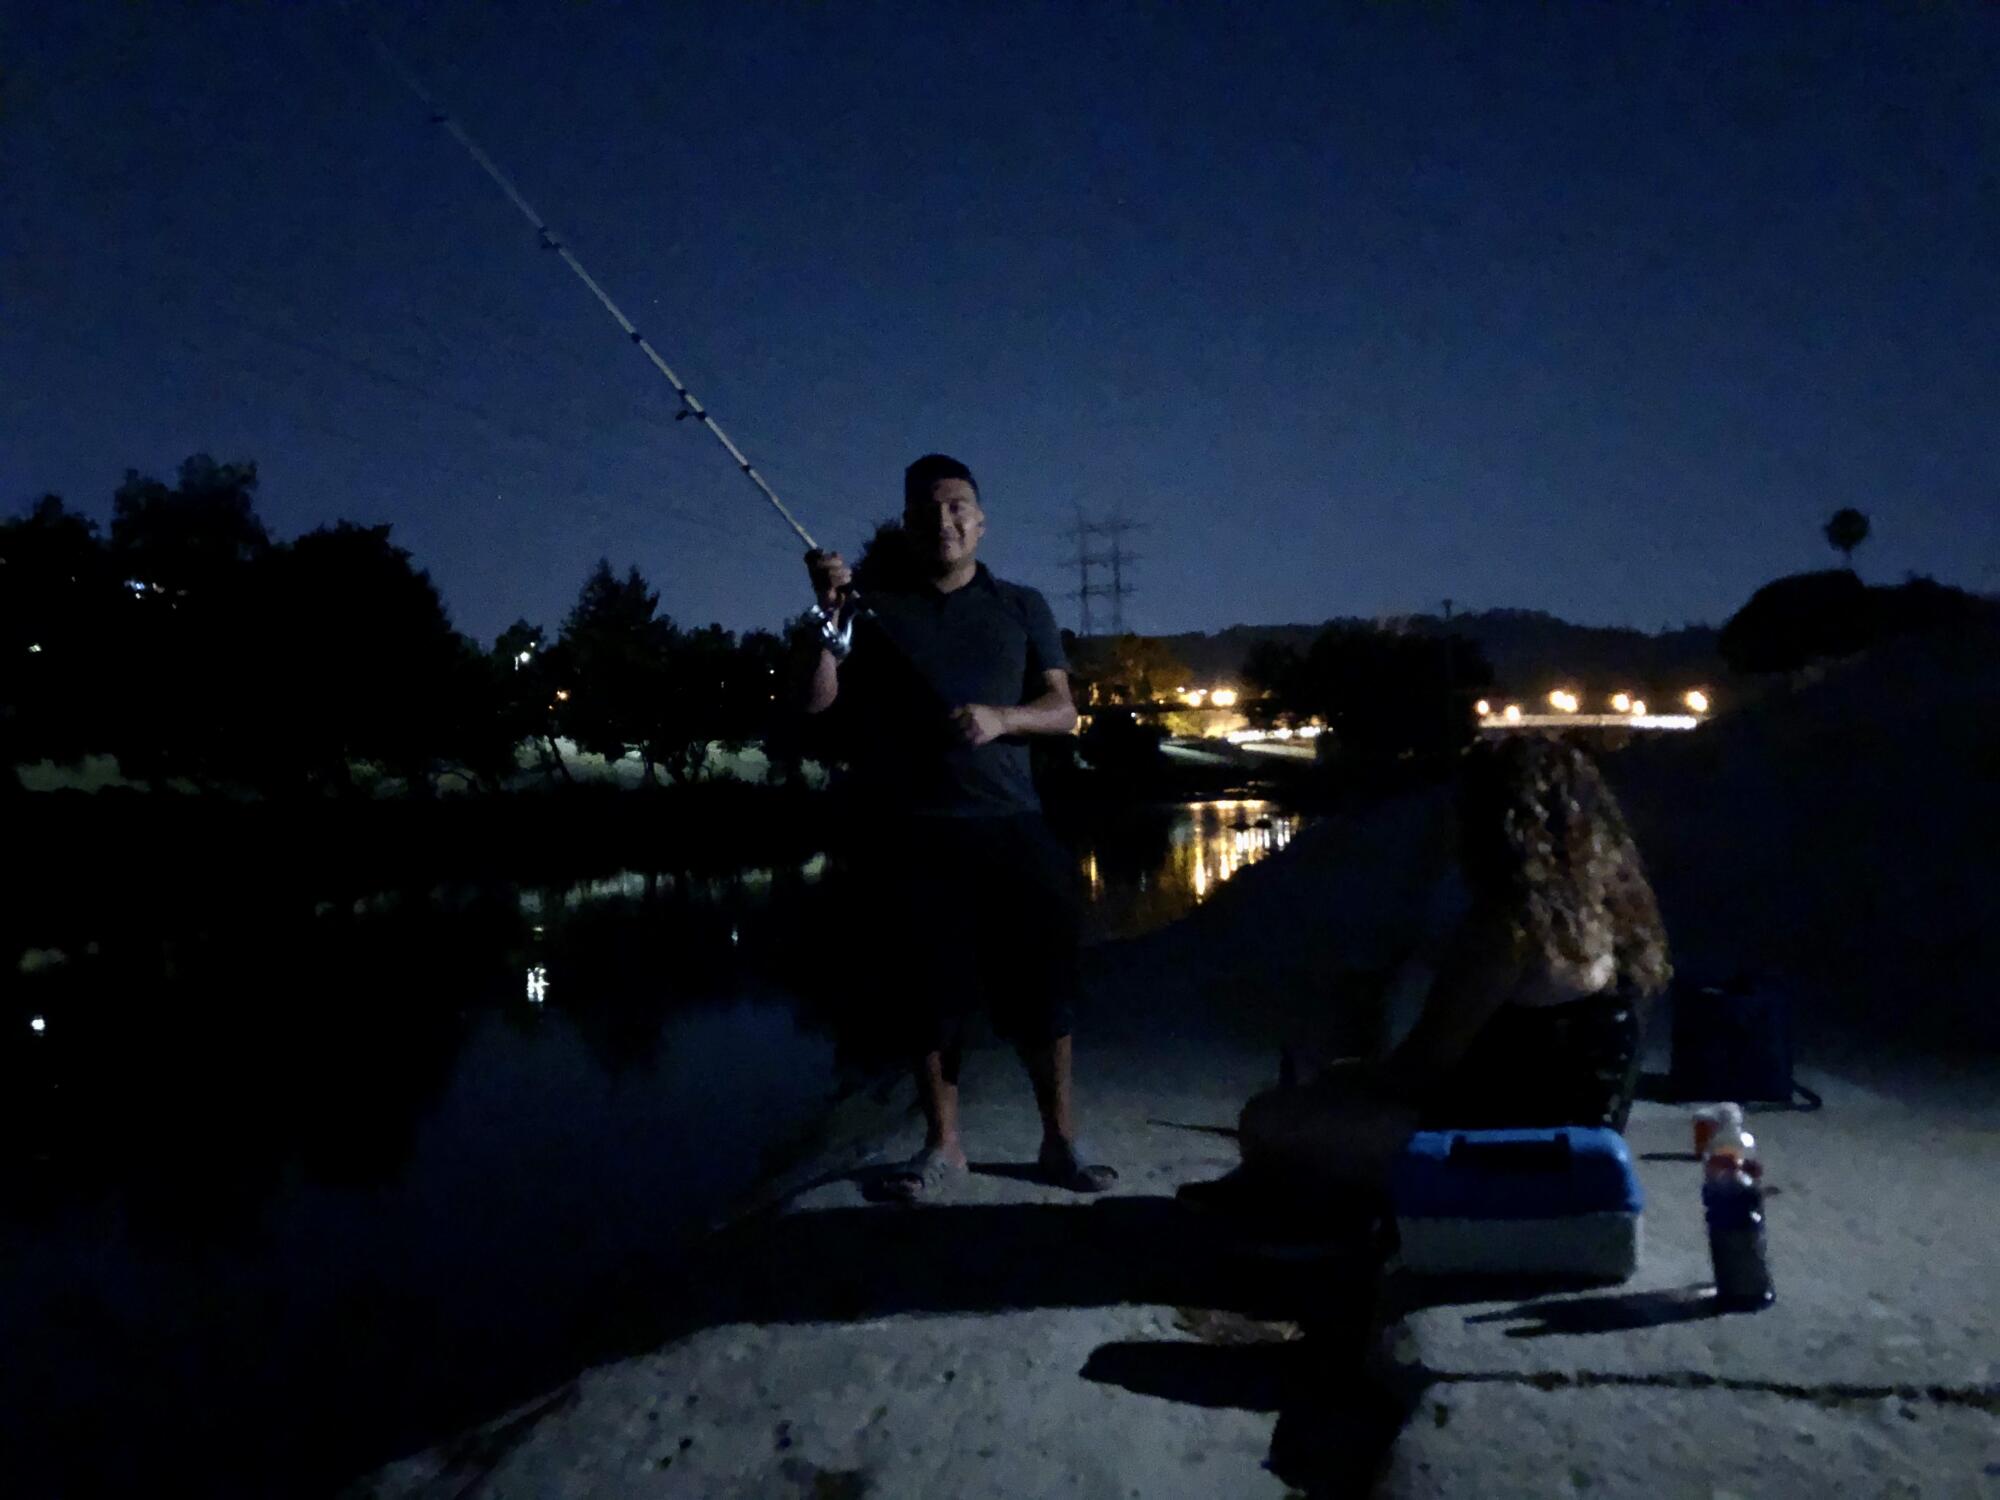 Alex Mendoza fishes with a friend after sunset.